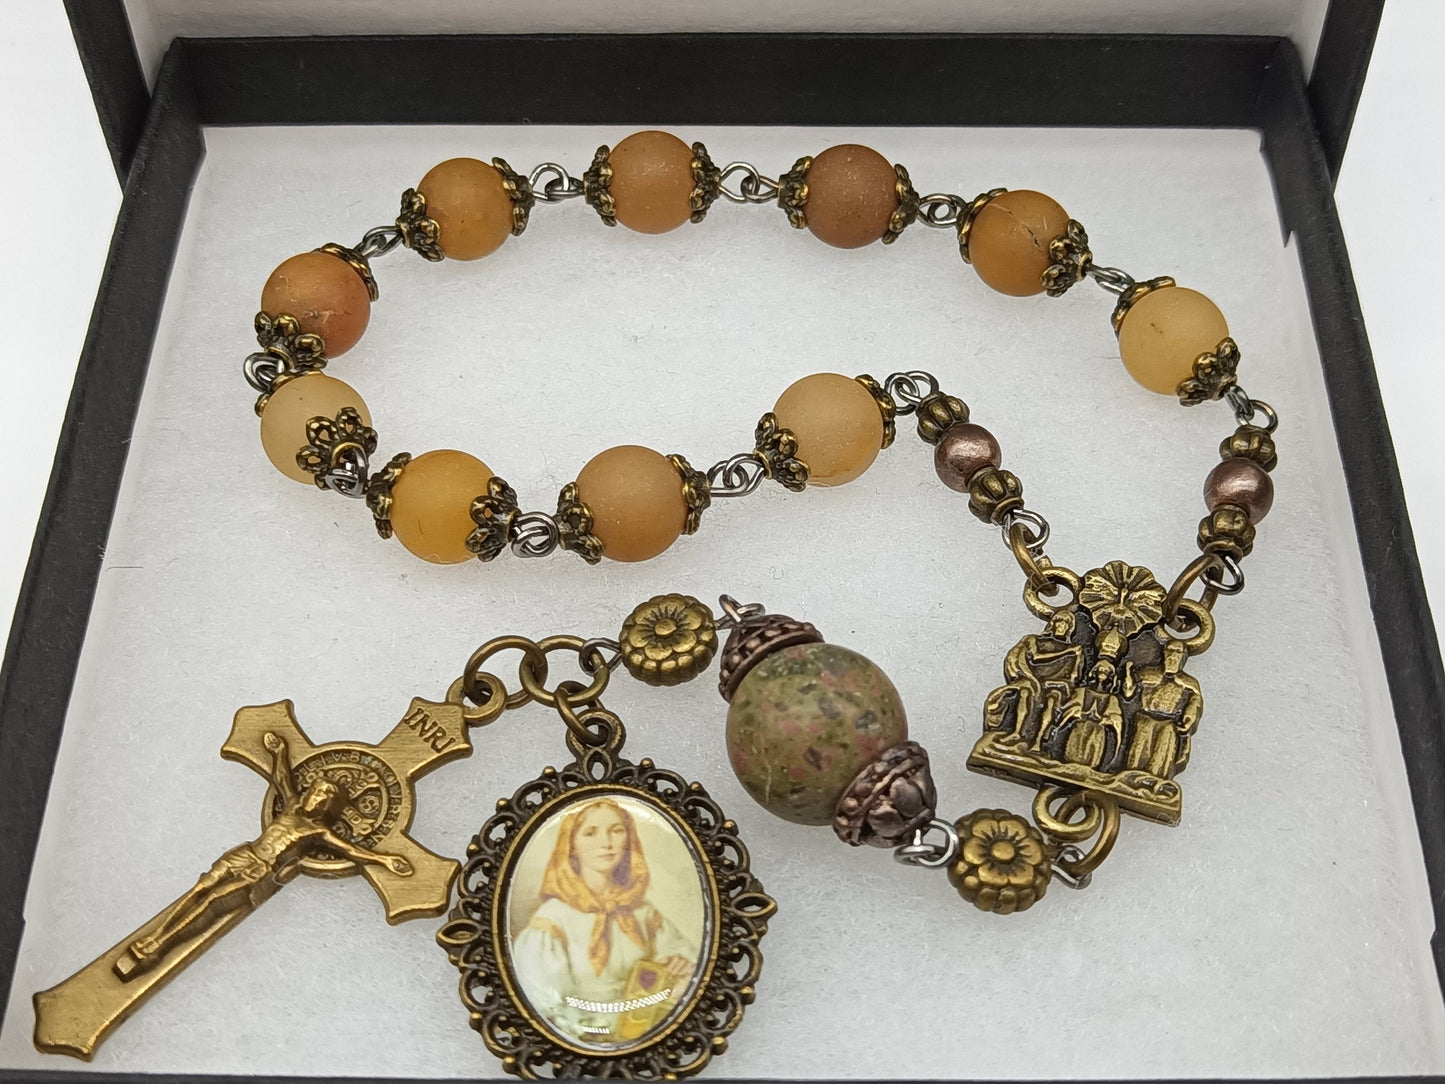 St Dymphna agate gemstone single decade Rosary beads, Coronation of Our Lady medal, St Benedict Crucifix, Rosaries, Pocket Rosaries